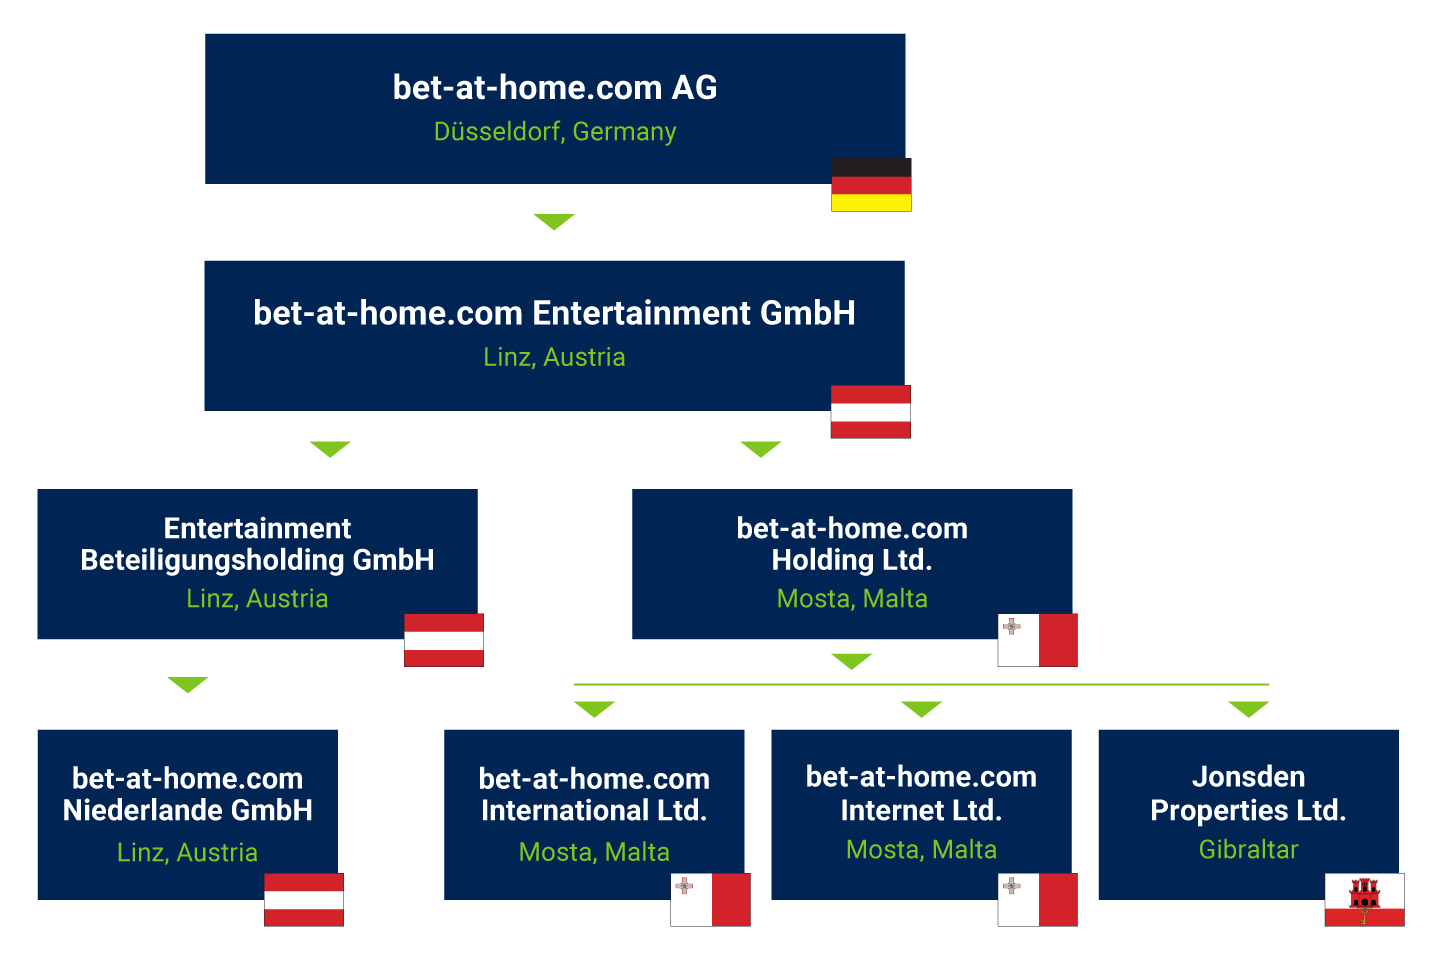 Bet-at-home company structure